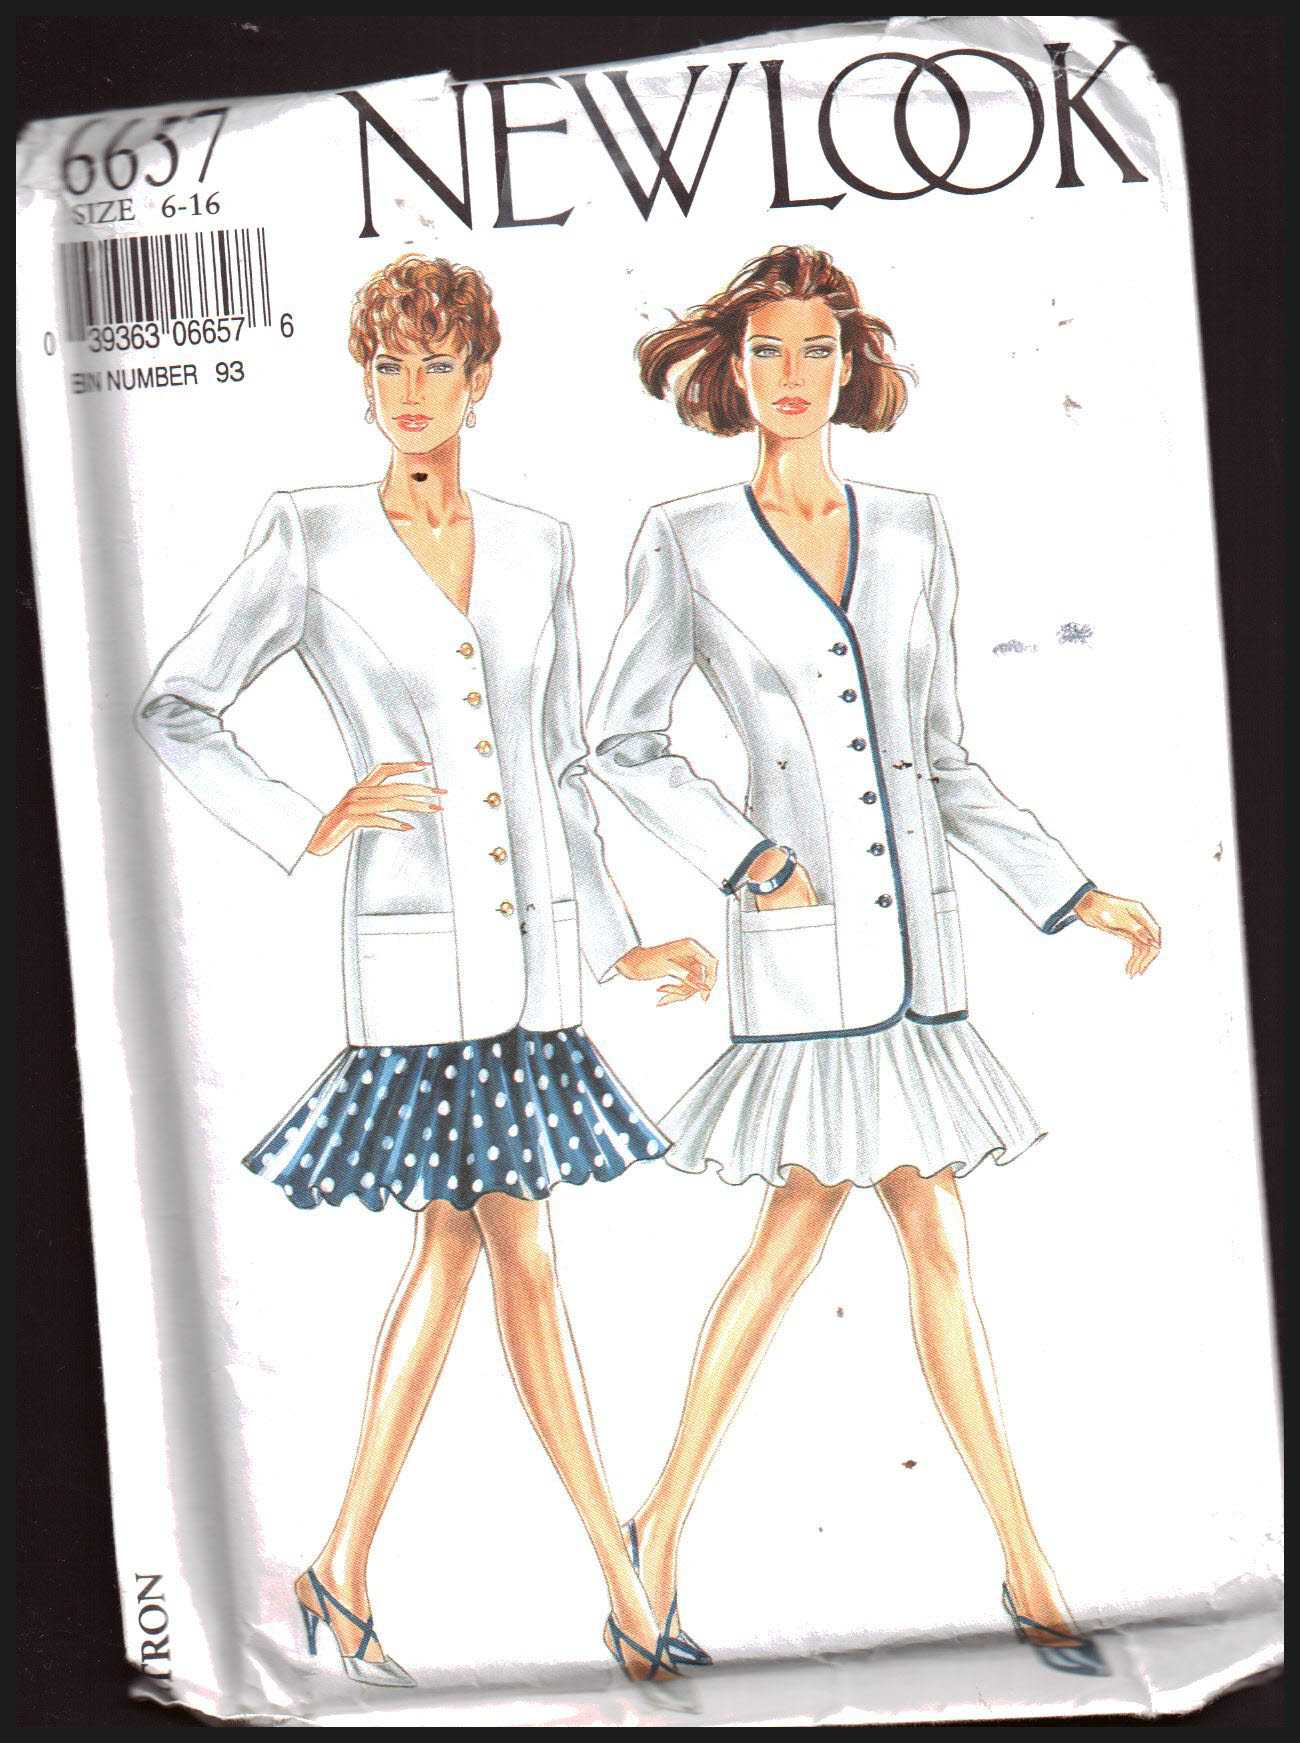 New Look 6657 Jacket, Skirt Size: 6-16 Used Sewing Pattern